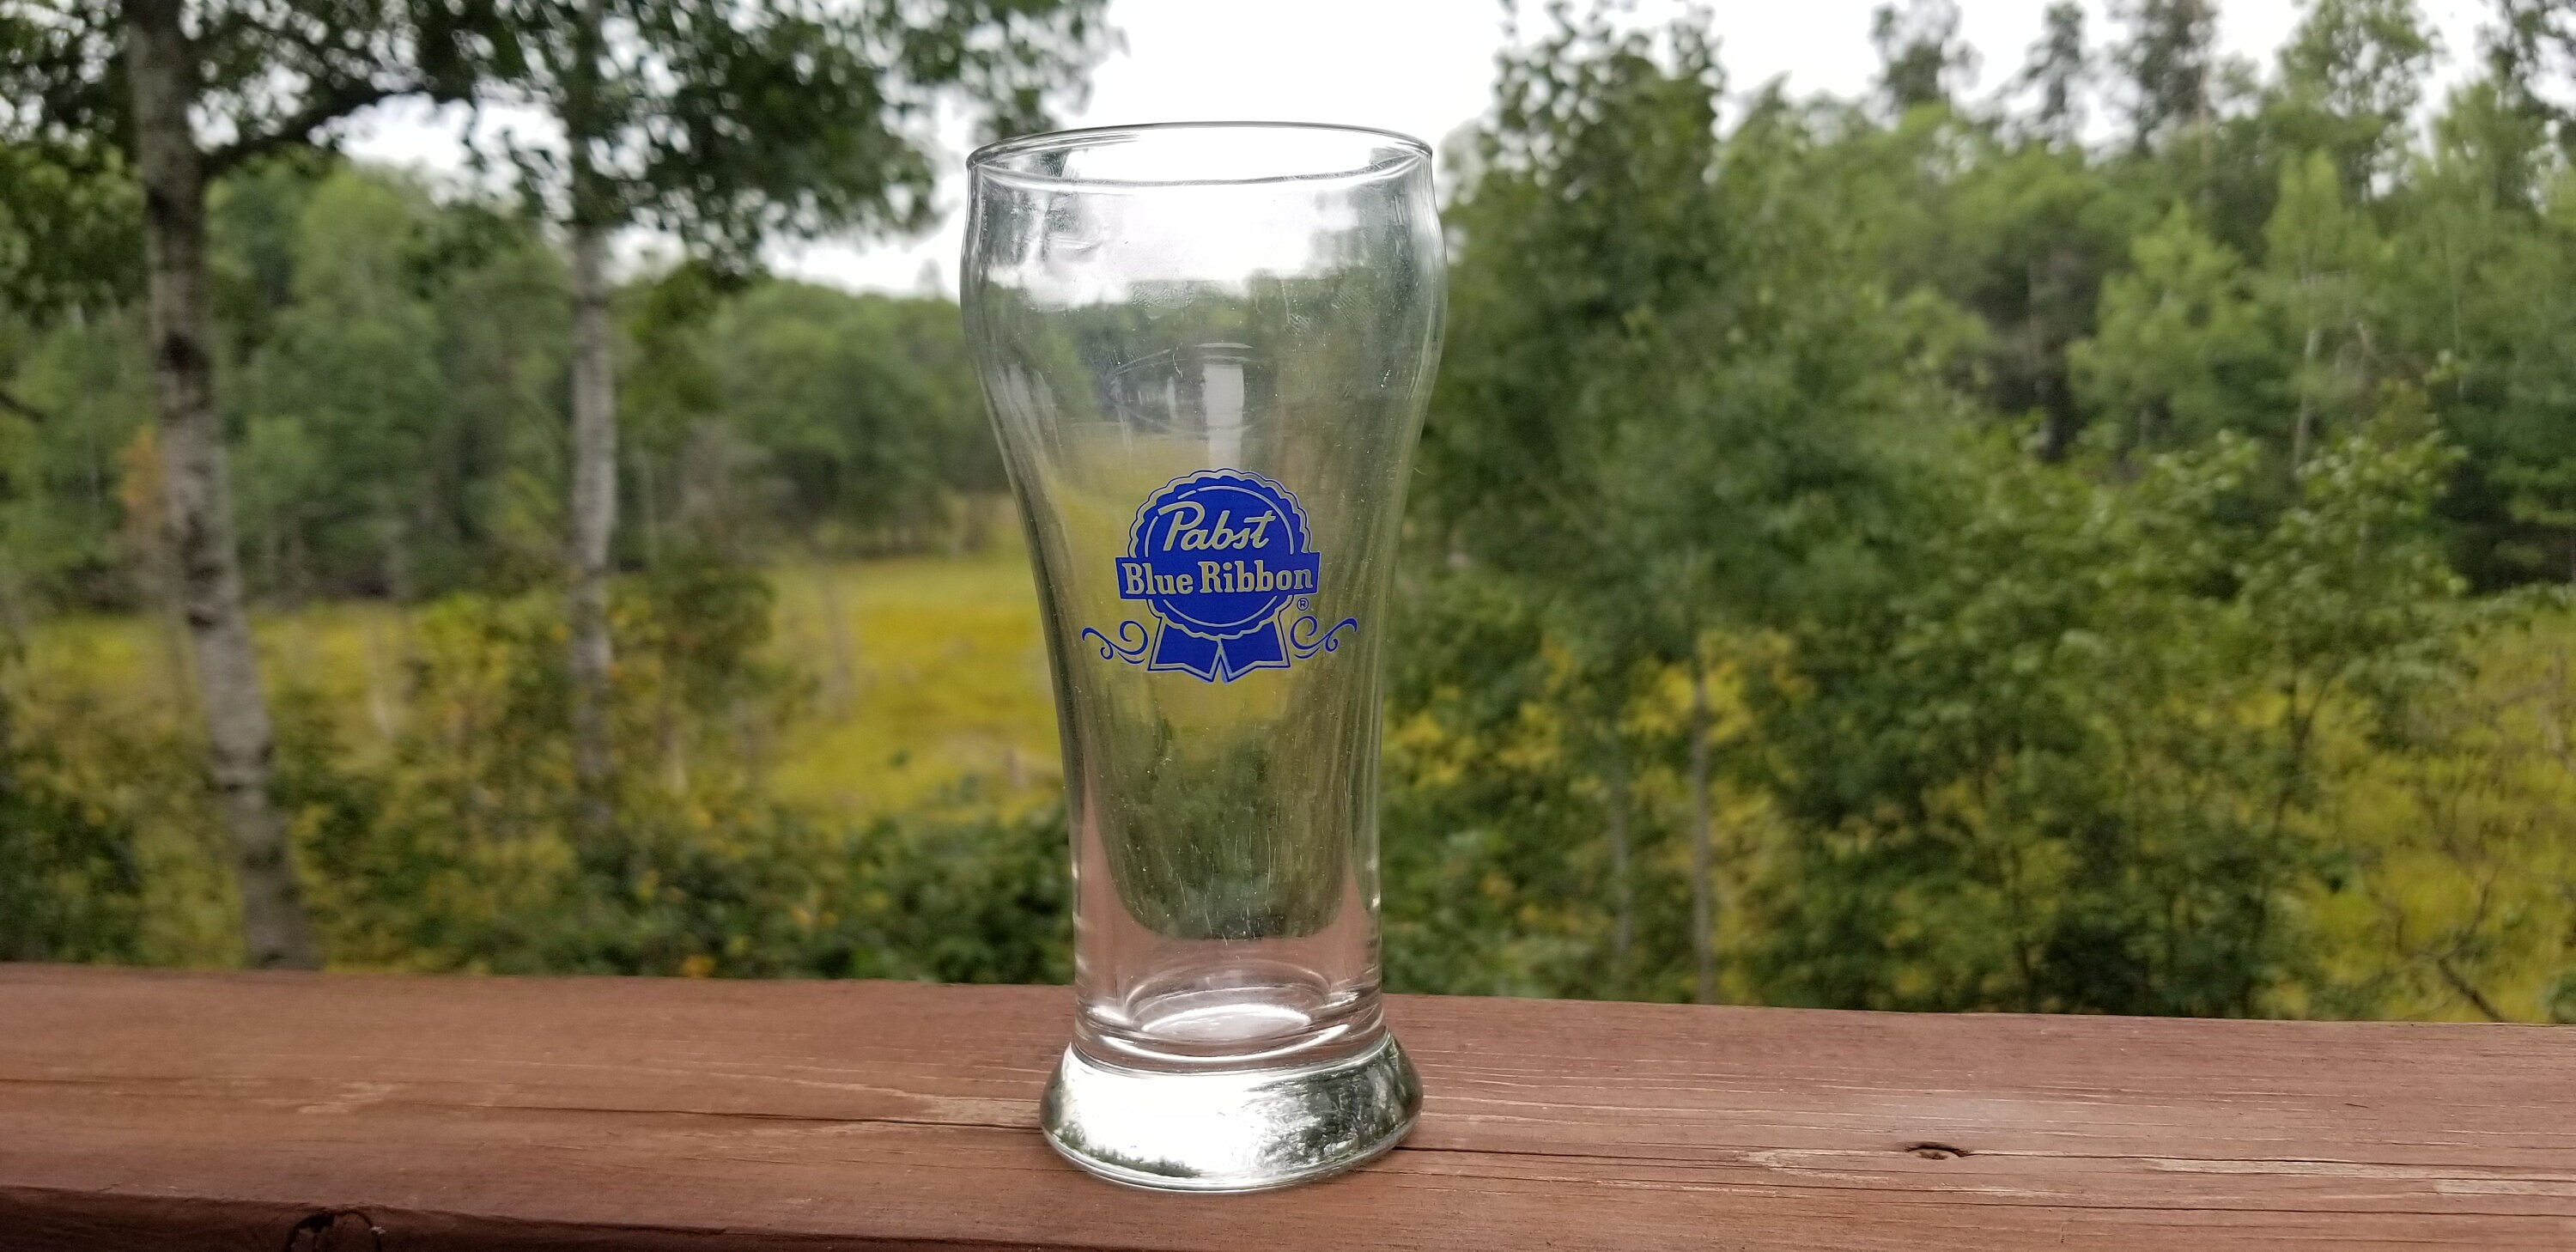 Pabst Beer Glass Reg US Pat Off Height  4-5/8" 